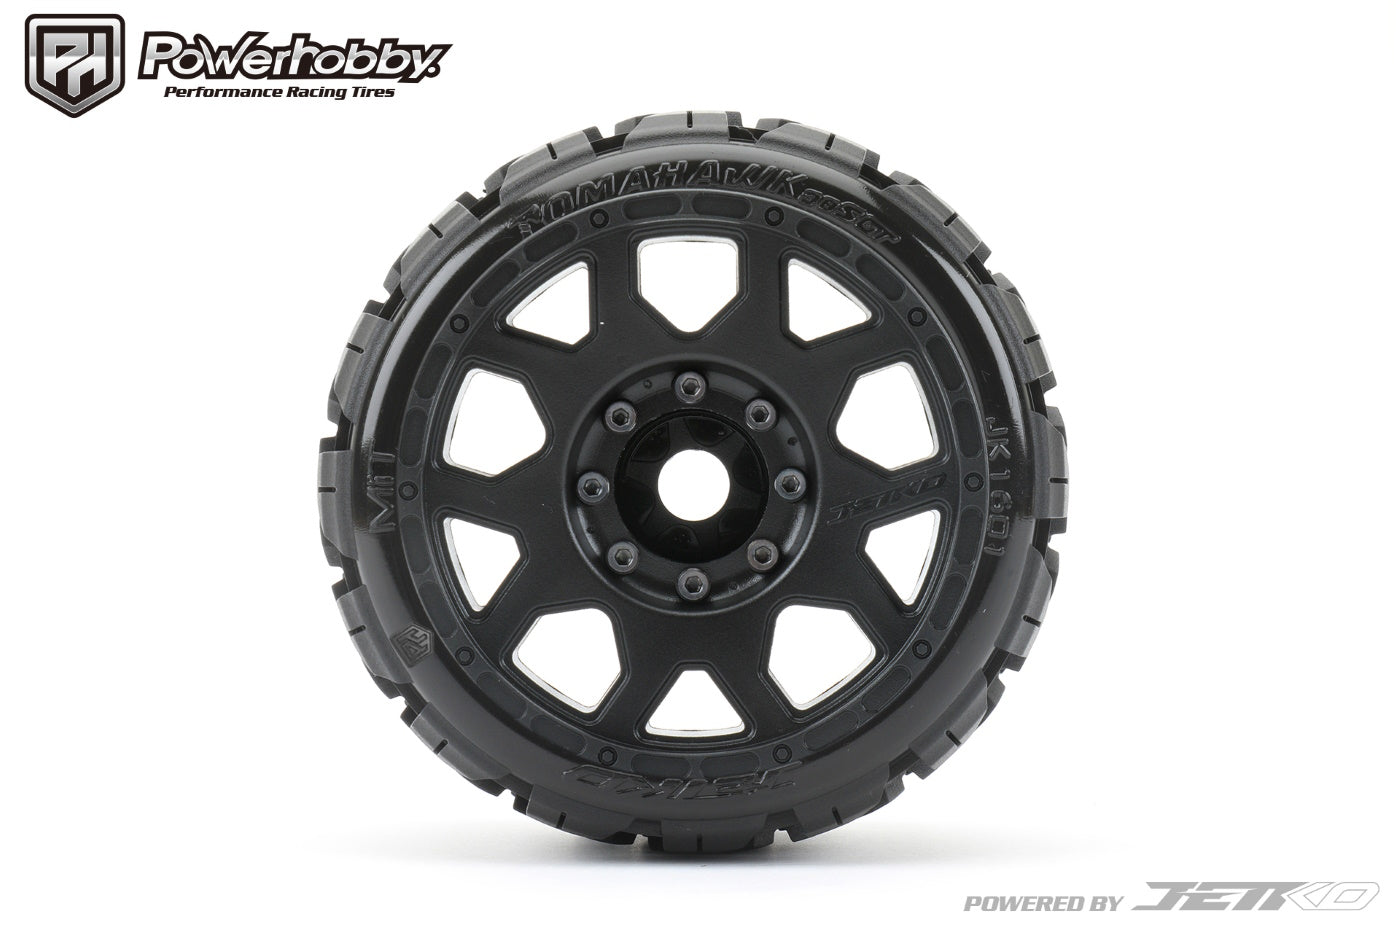 Powerhobby 1/8 SGT 3.8 Tomahawk Belted Mounted Tires (2) 17MM Low Profile - PowerHobby